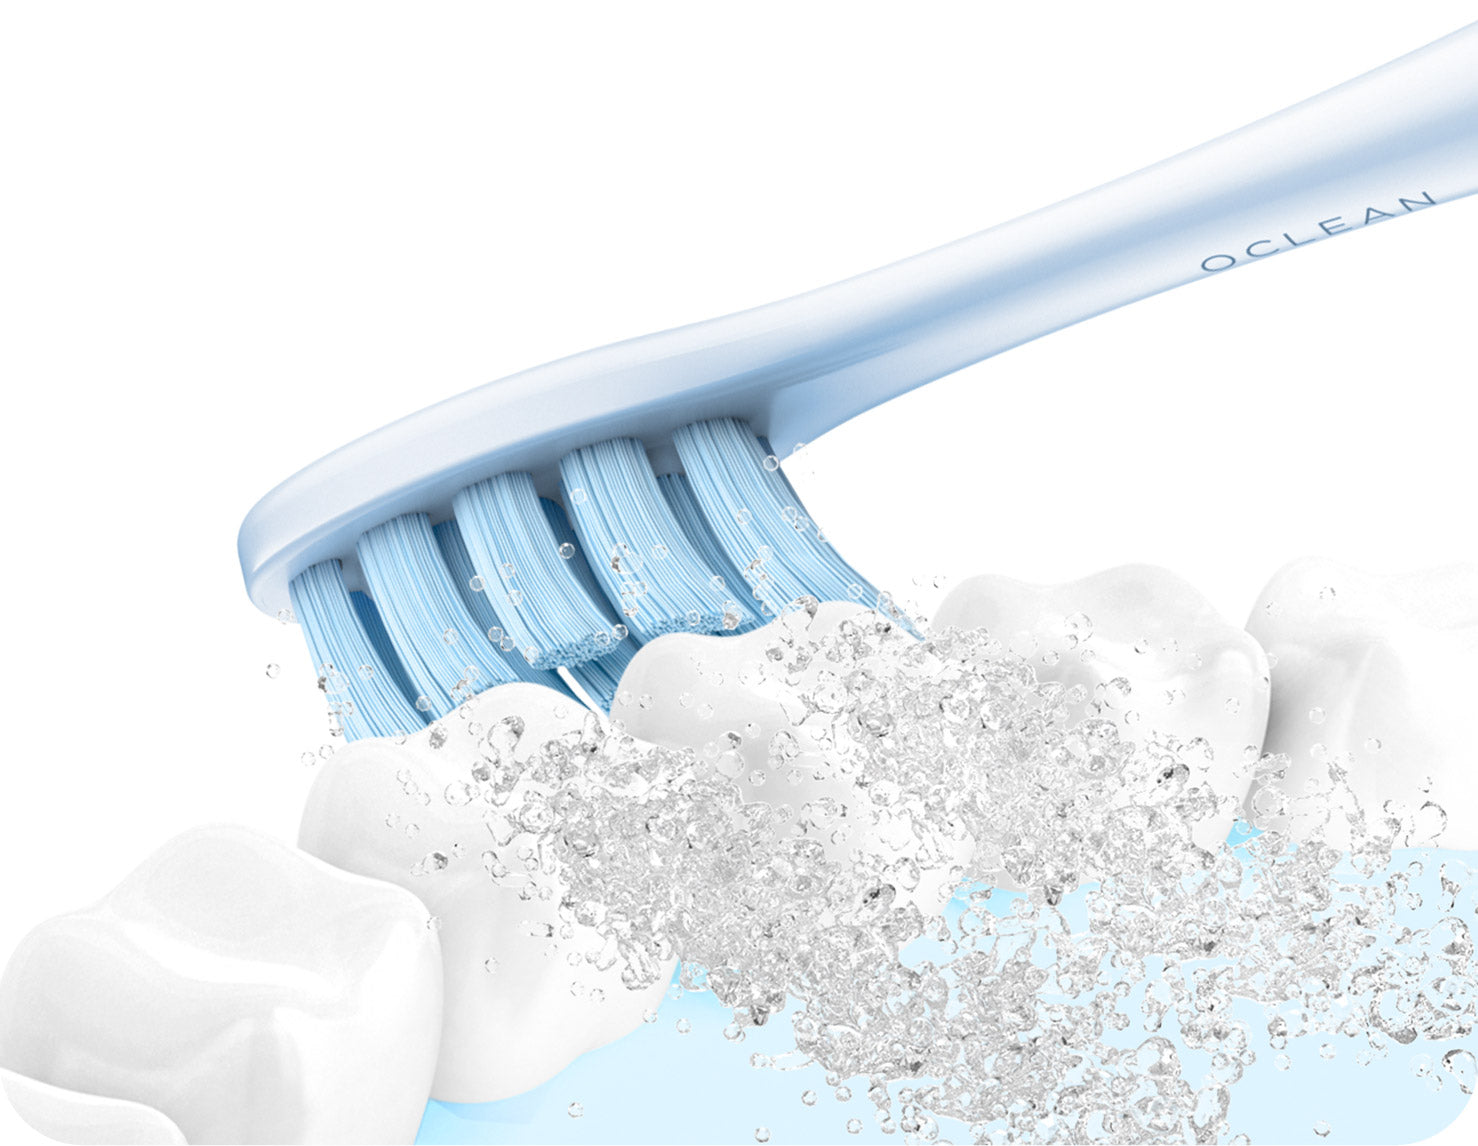 Oclean F1 Electric Toothbrush-Toothbrushes-Oclean US Store